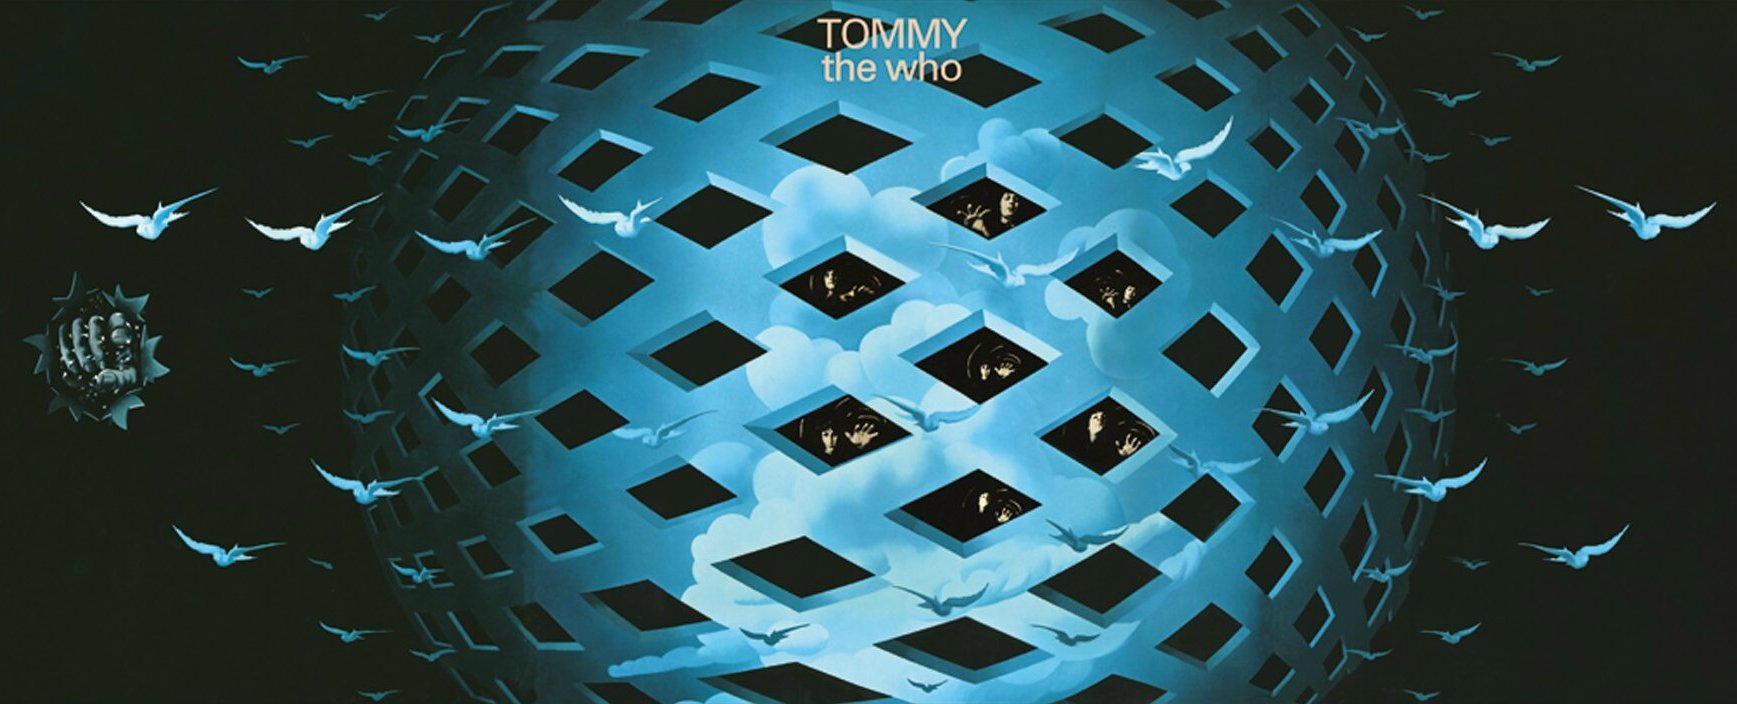 TommyPoster